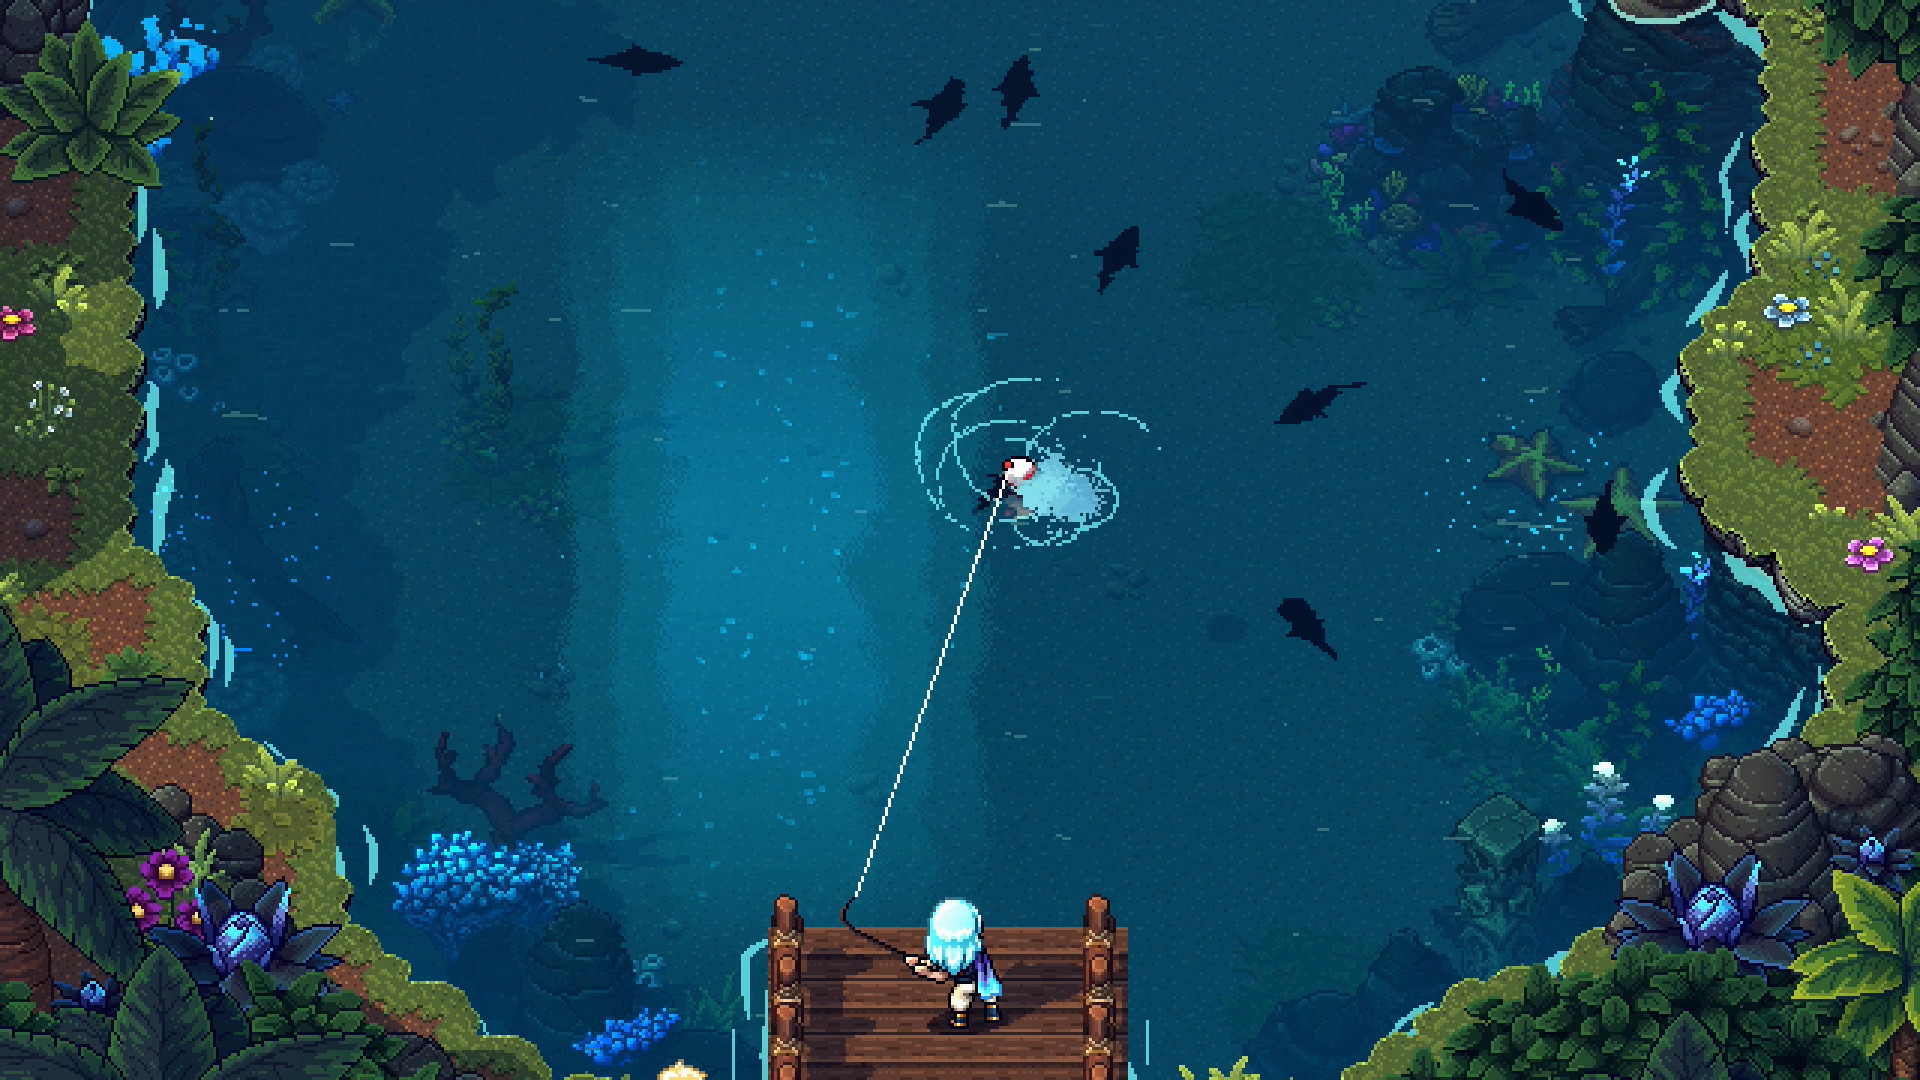 Valere in one of the game's many fishing spots.